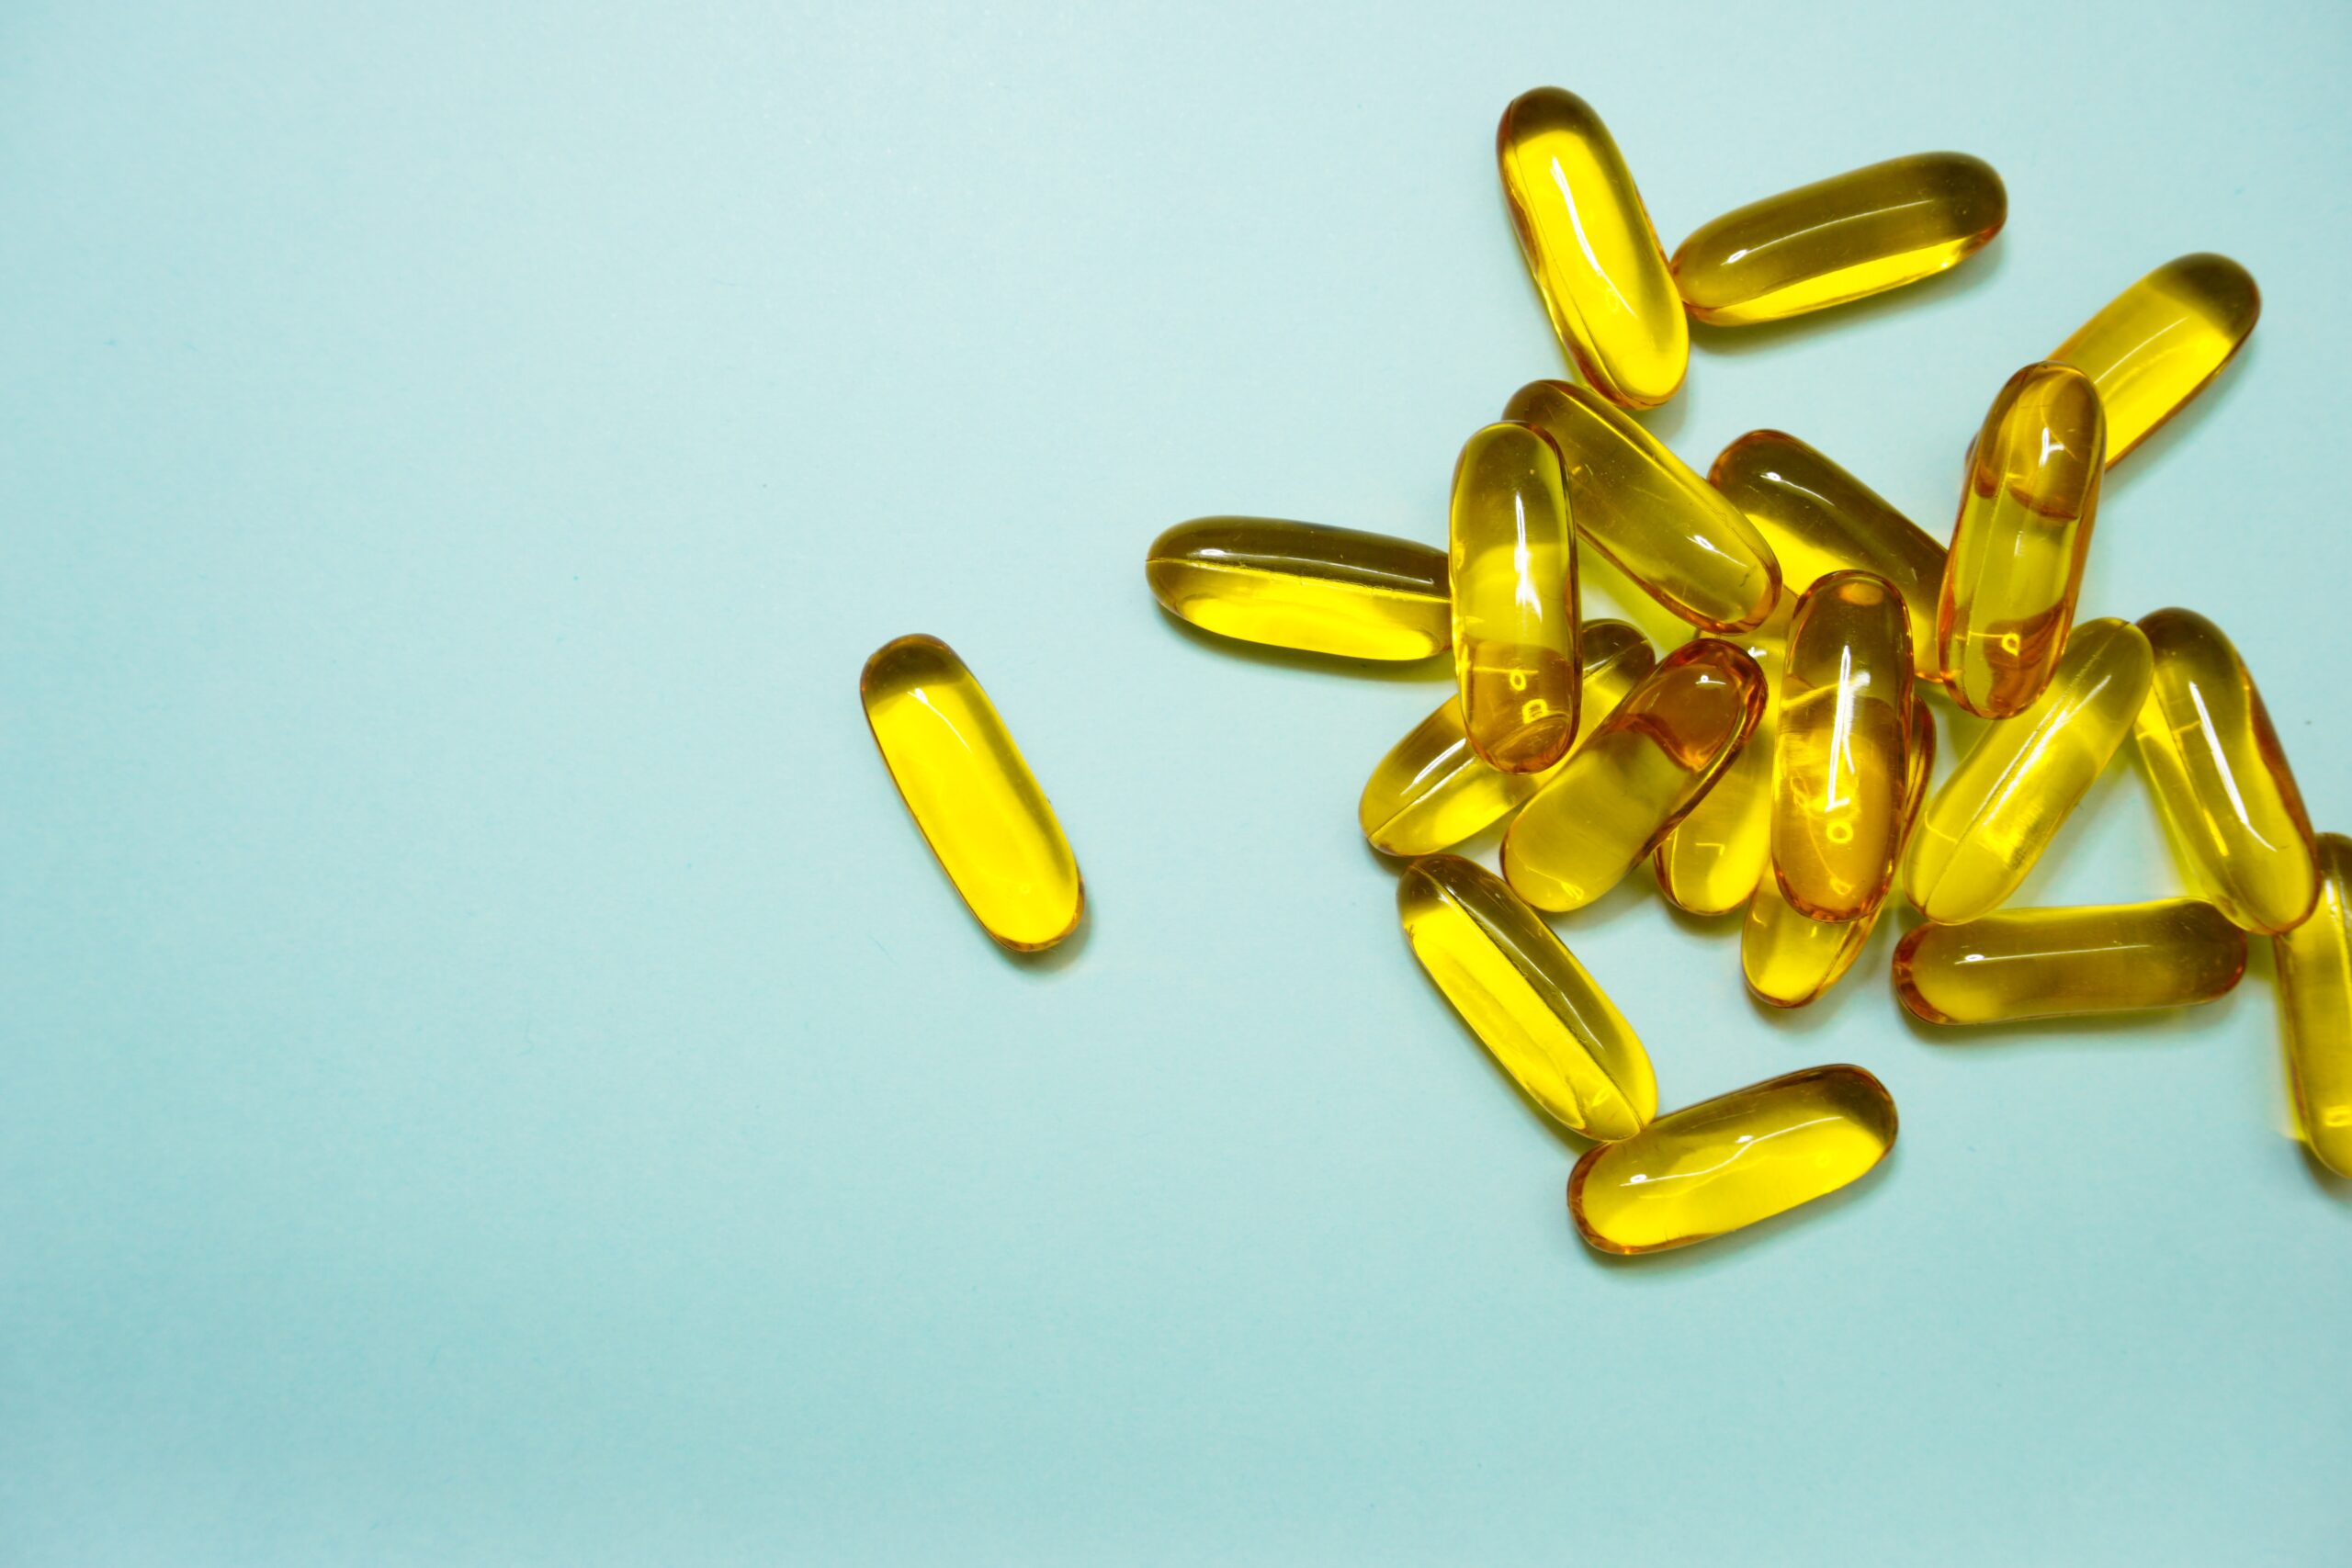 65. How Are Multivitamins Different From Individual Vitamins?